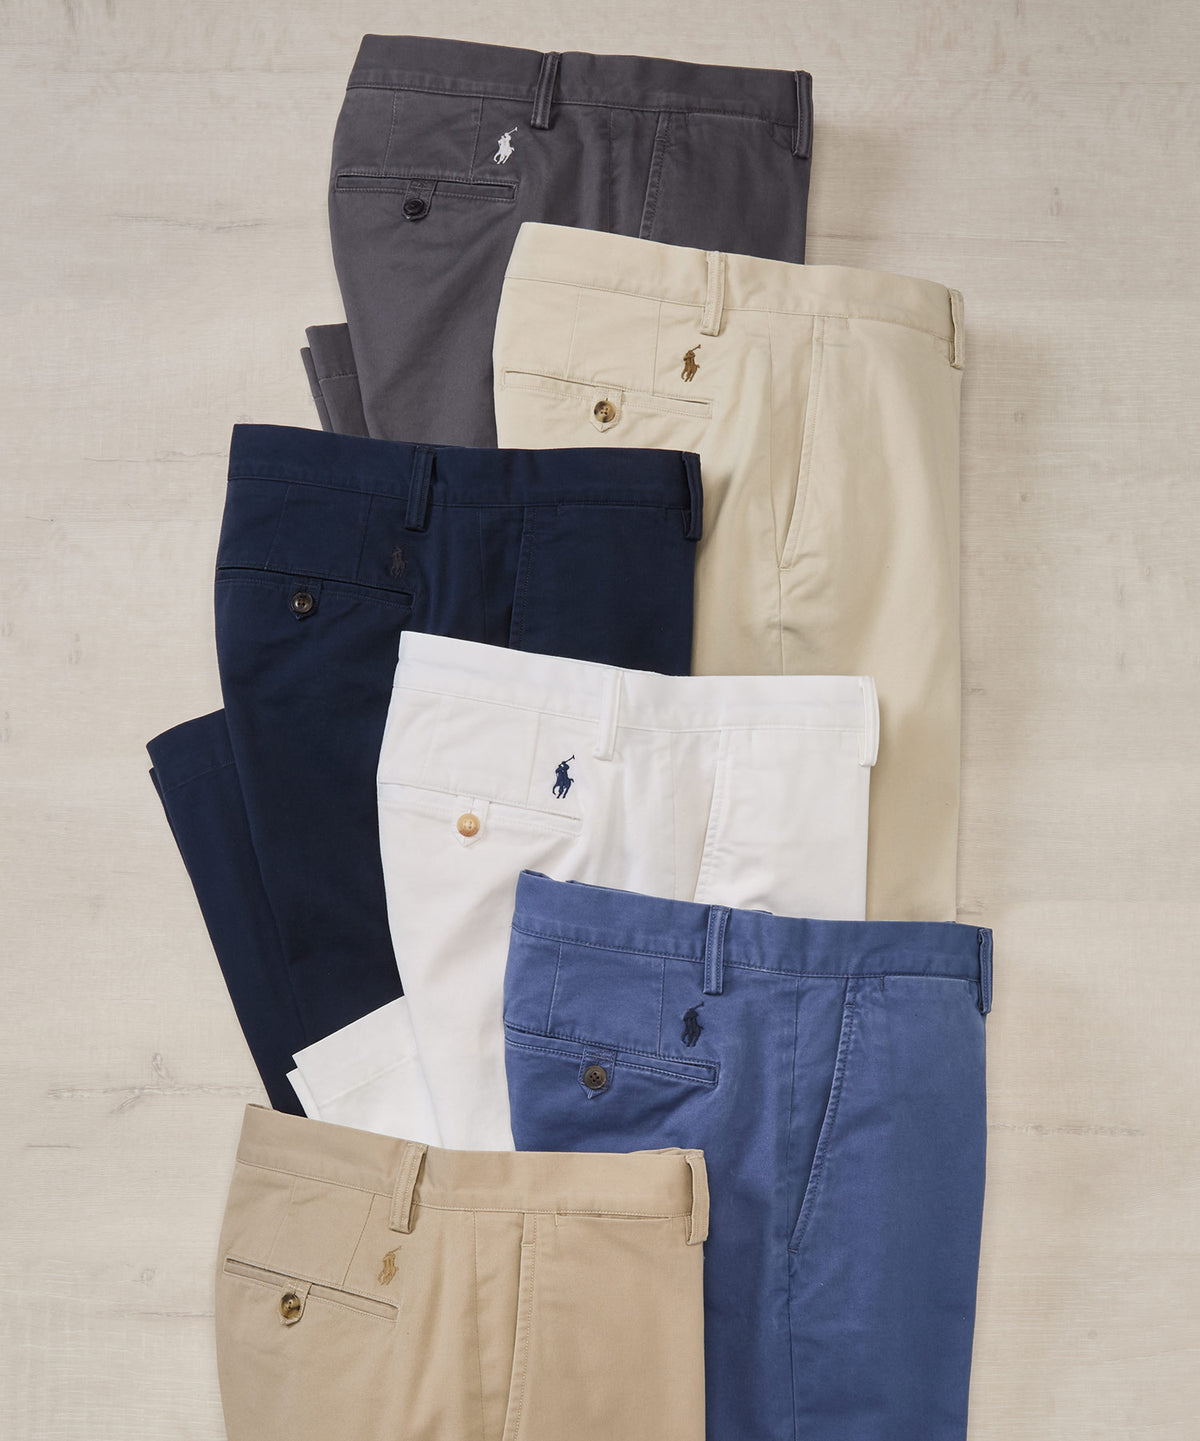 Straight Stretch Chino - Brown | Levi's® US